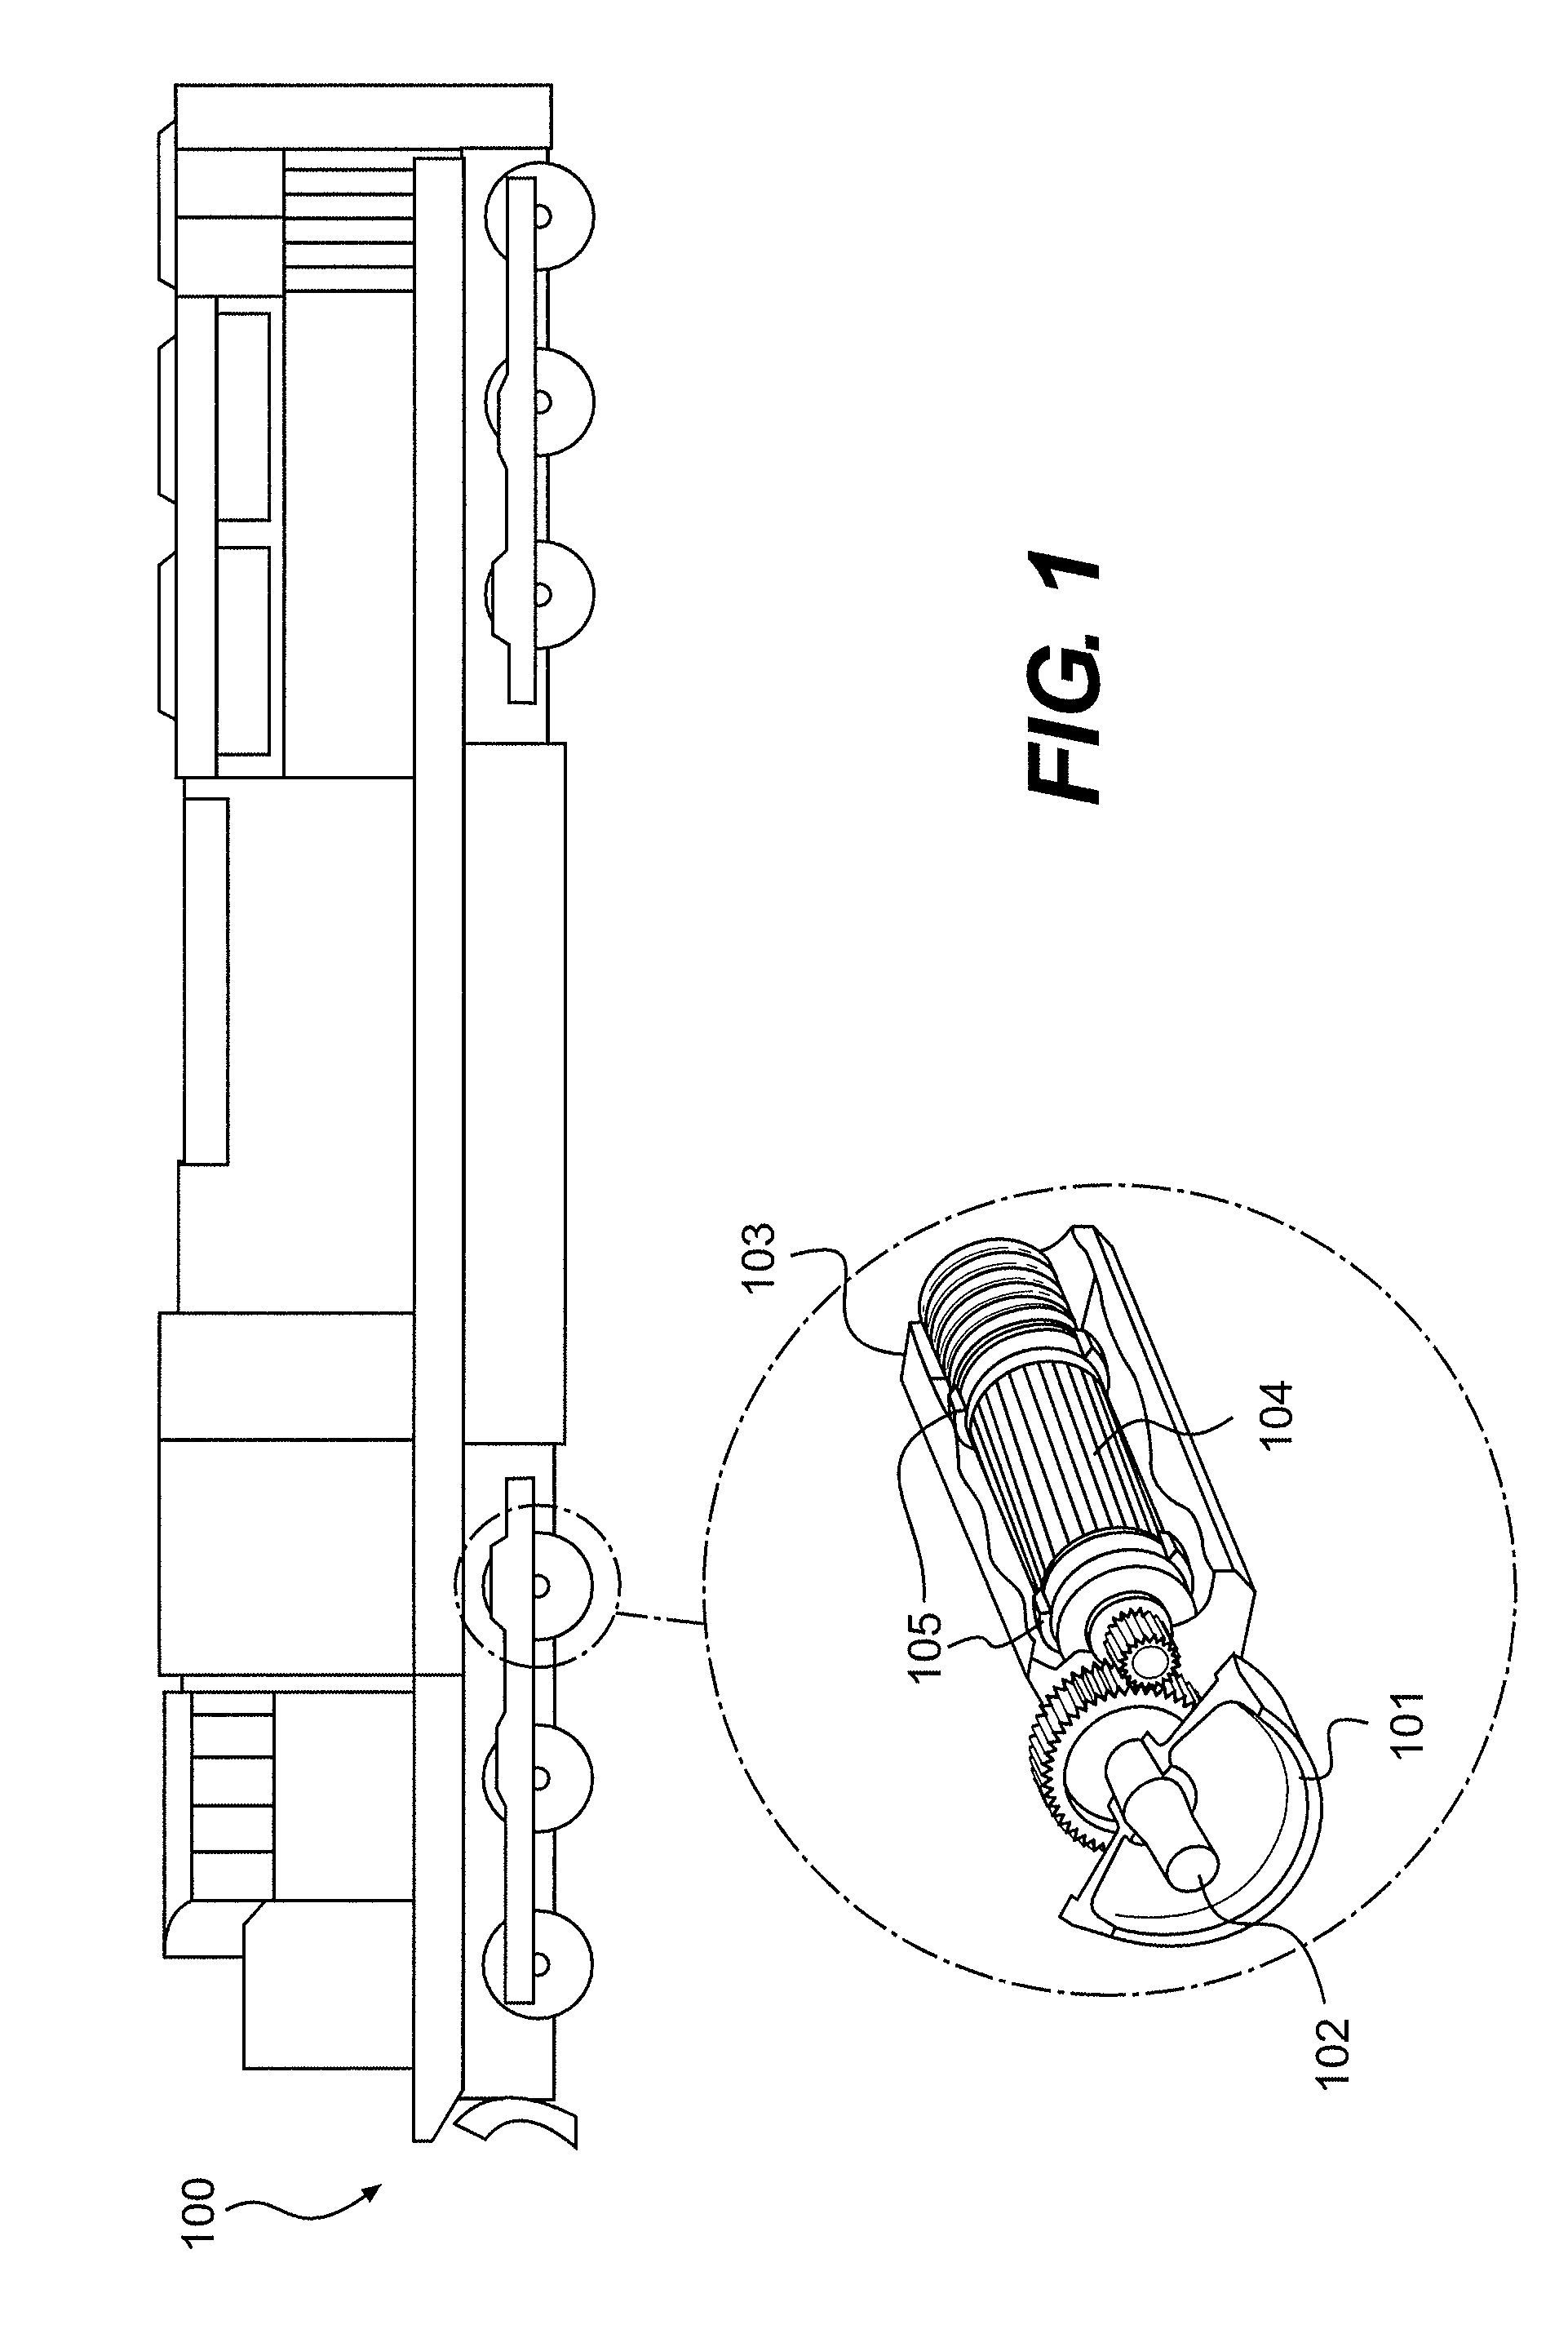 Continuously variable dynamic brake for a locomotive